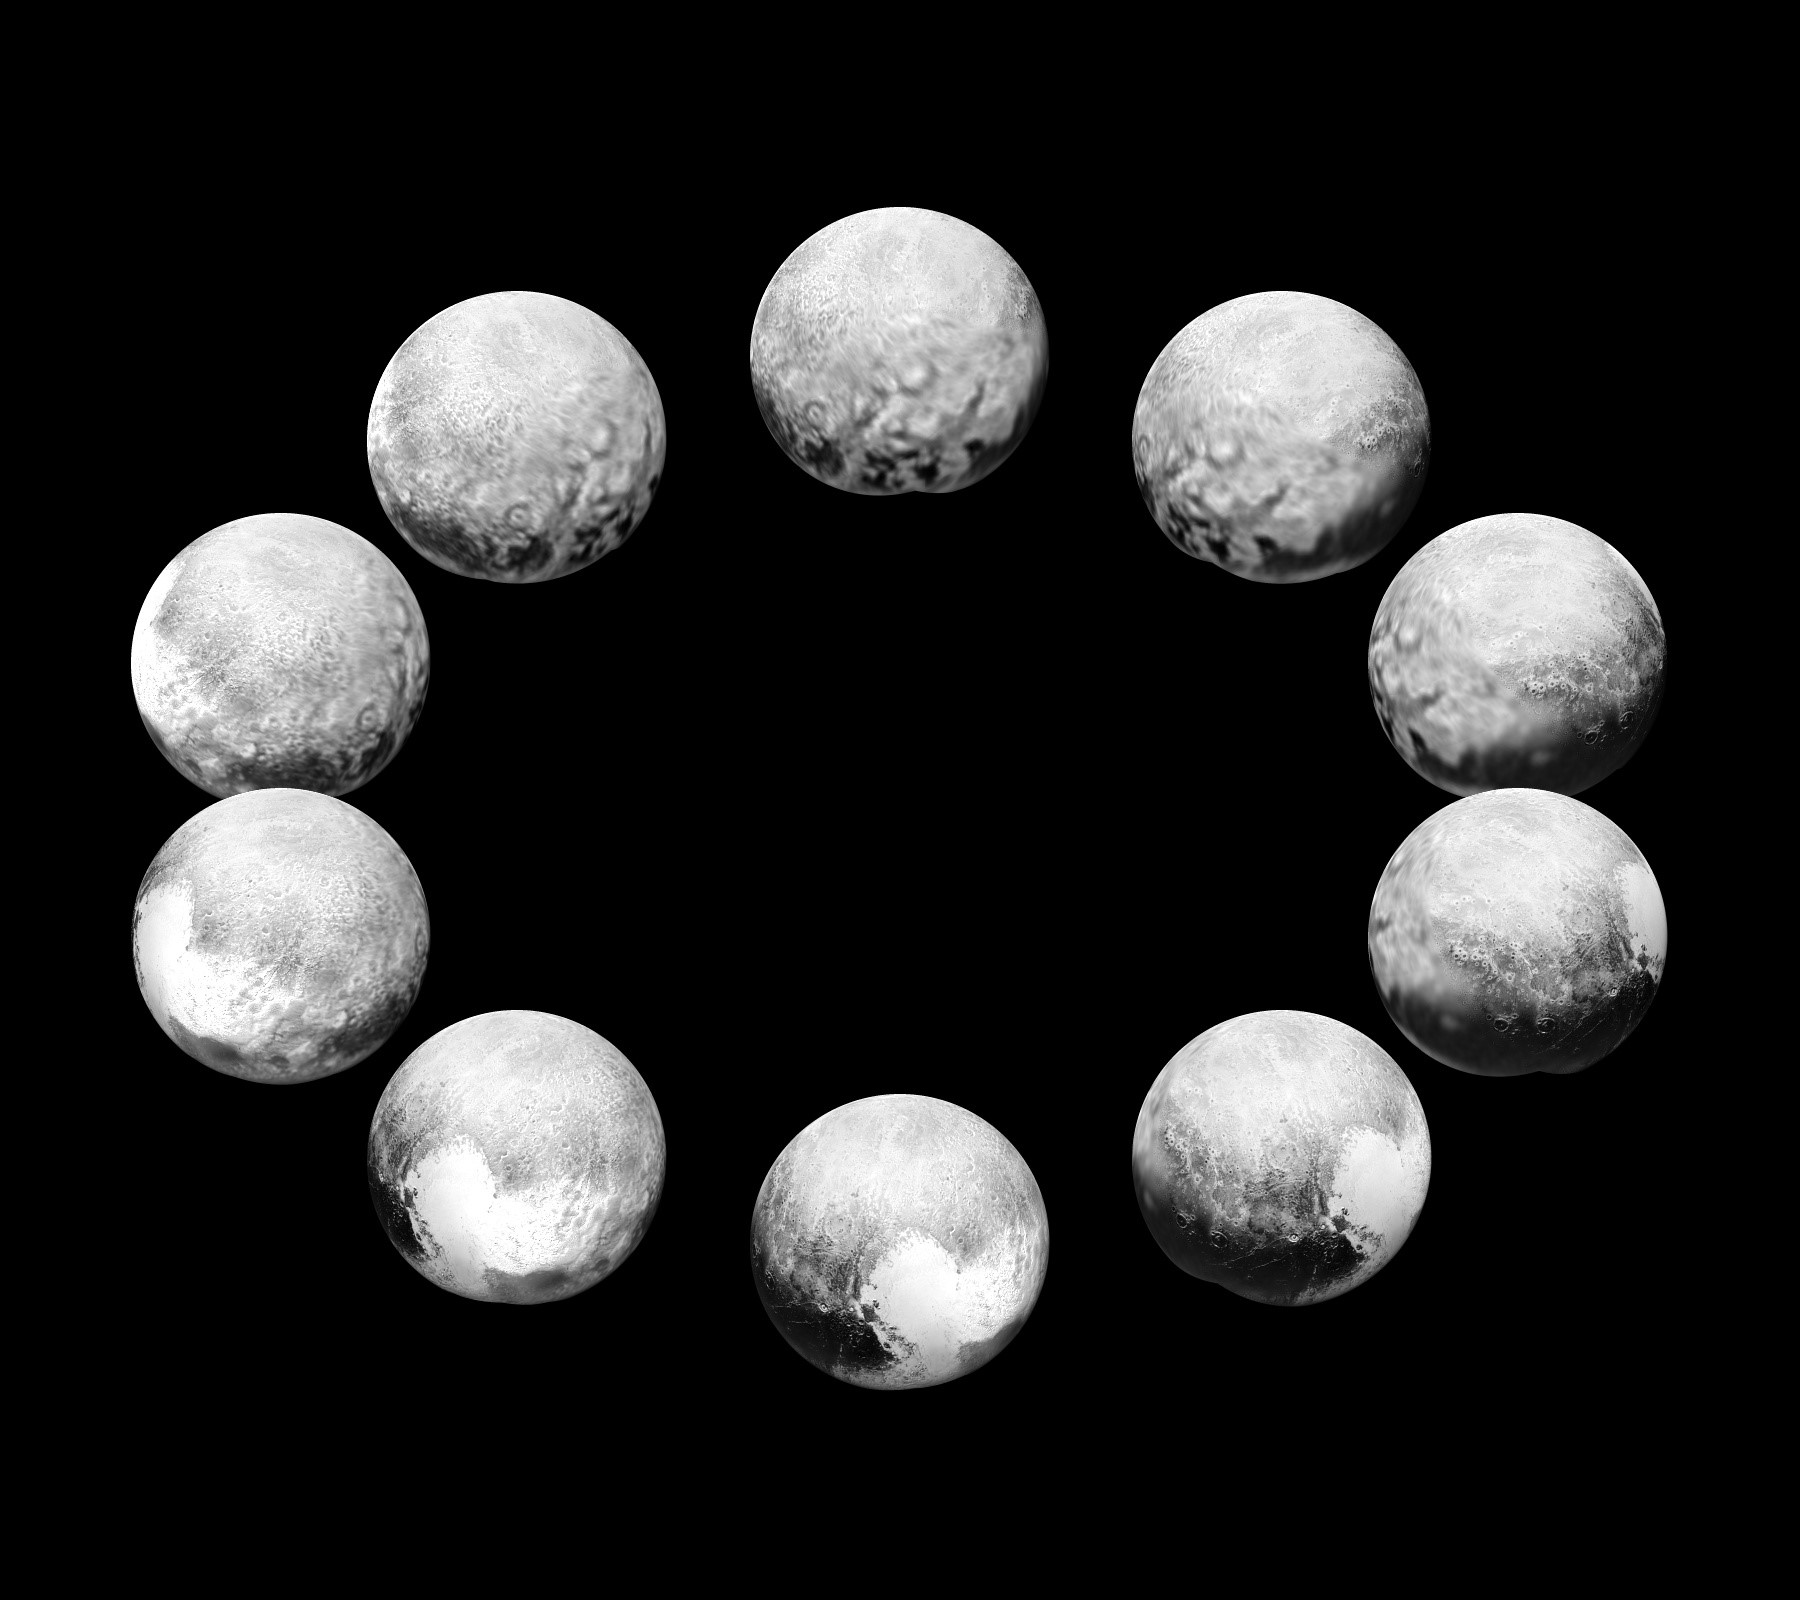 A full-rotation sequence showing one Pluto day, which is 6.4 Earth days long. Image Credit: NASA/JHUAPL/SwRI